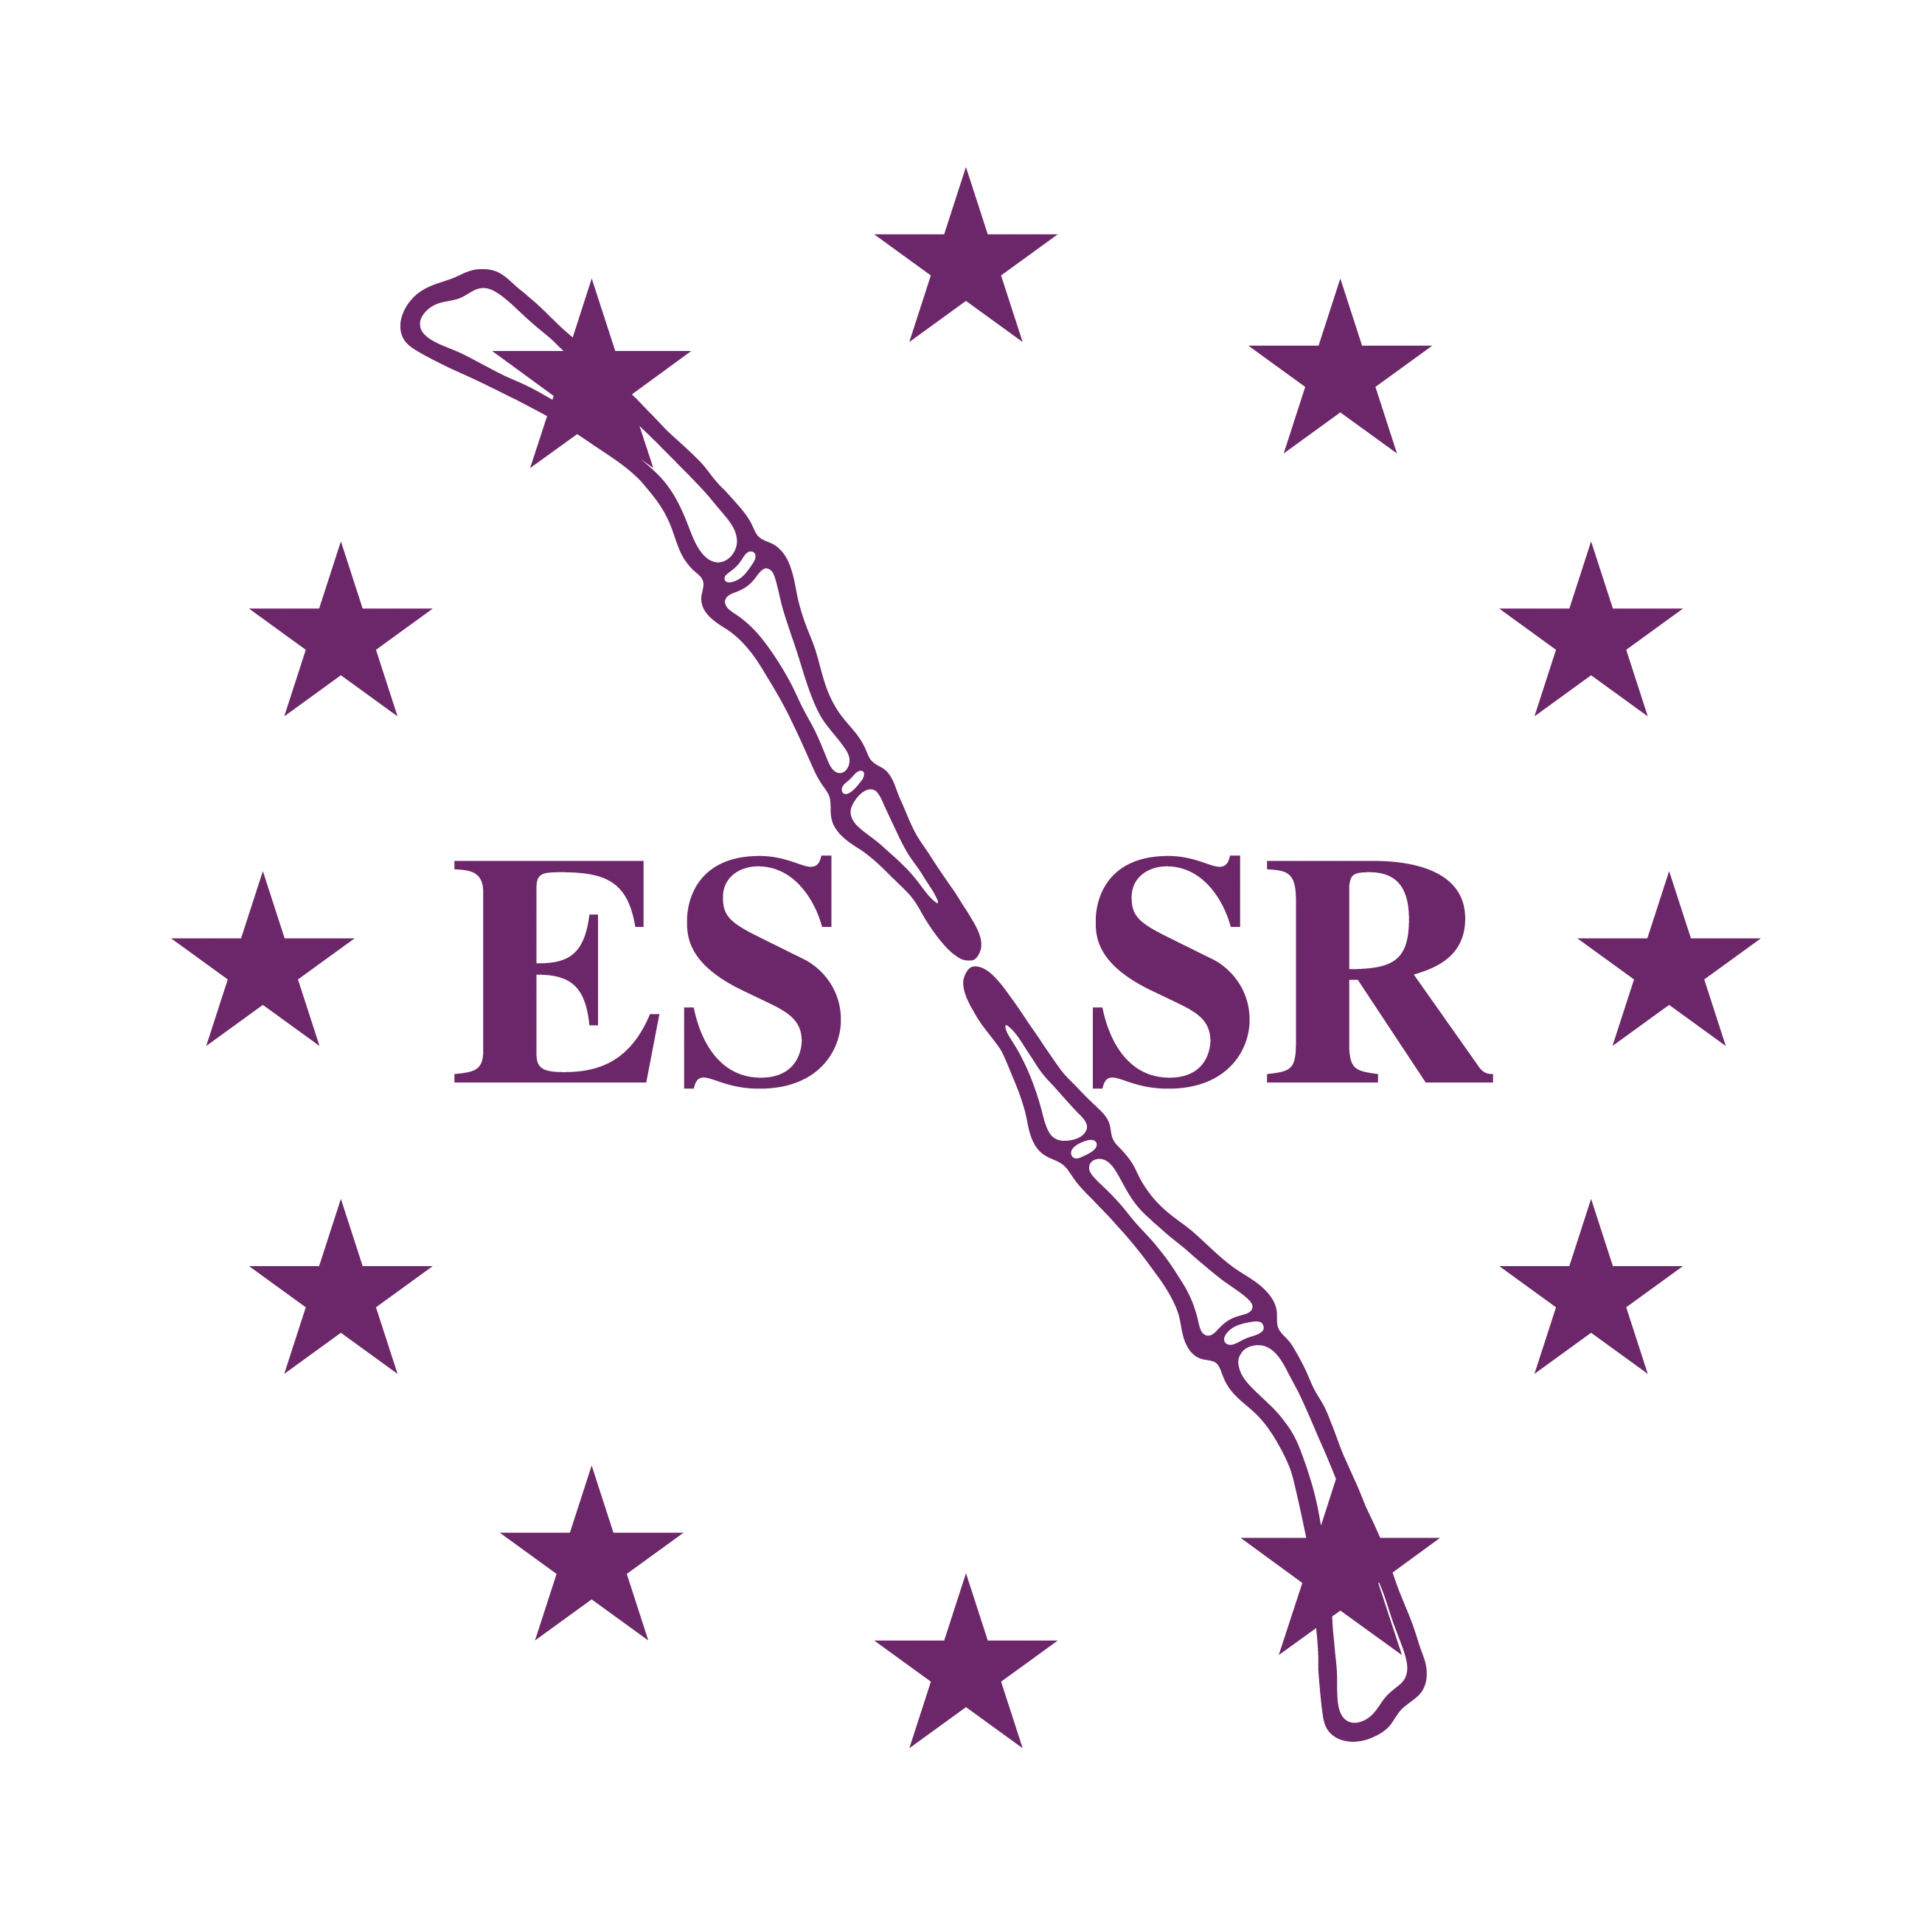 ESSR 2019 - Annual Scientific Meeting of The European Society of Musculoskeletal Radiology